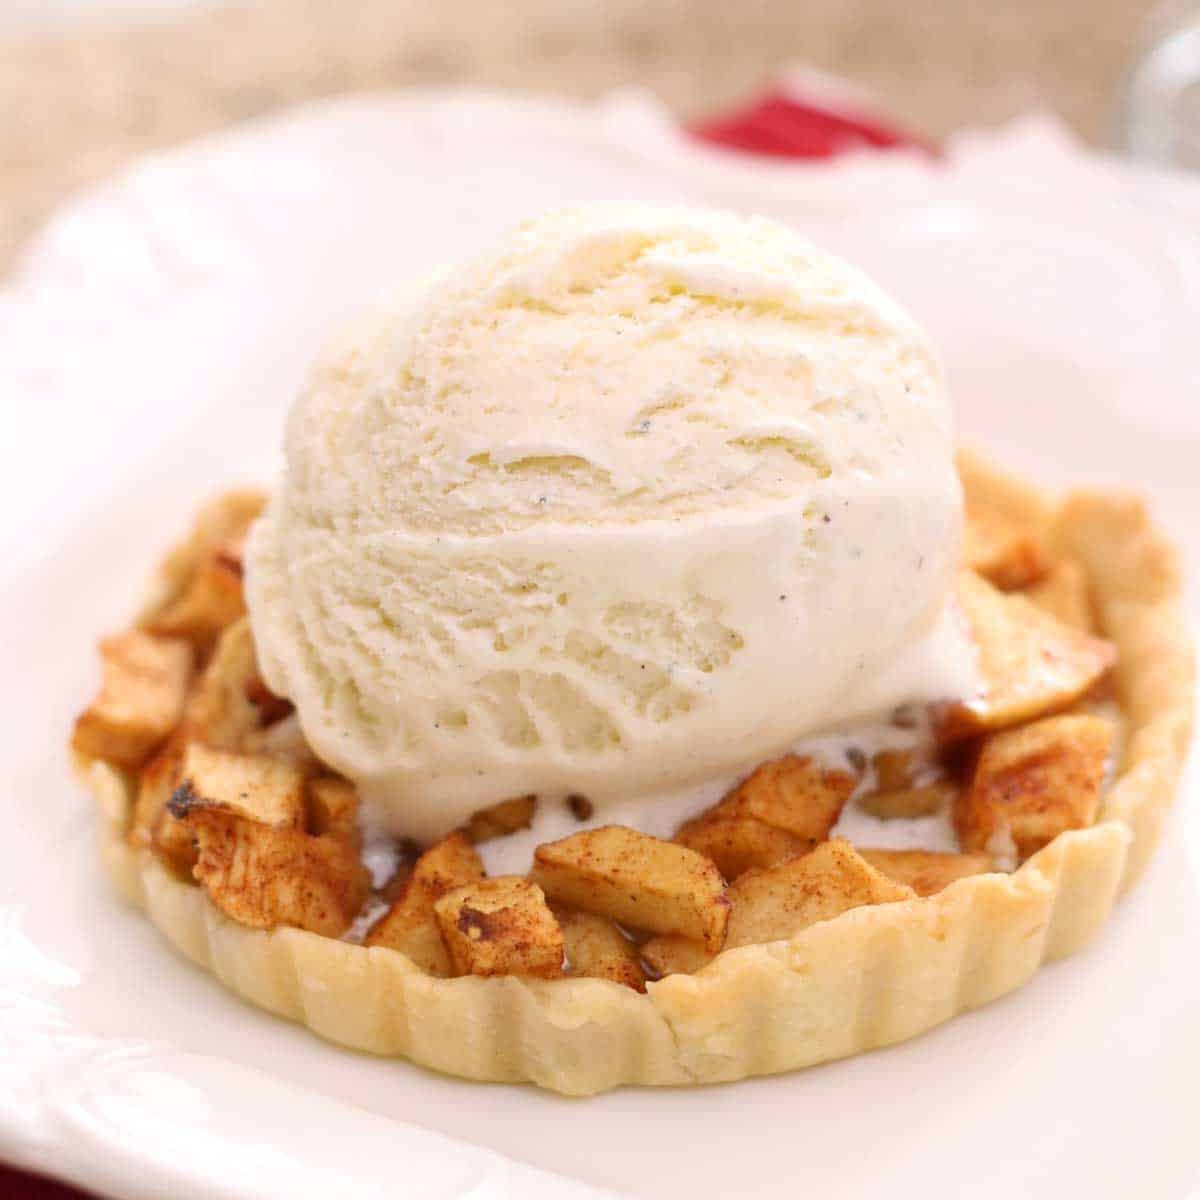 A mini apple pie topped with a scoop of vanilla ice cream.